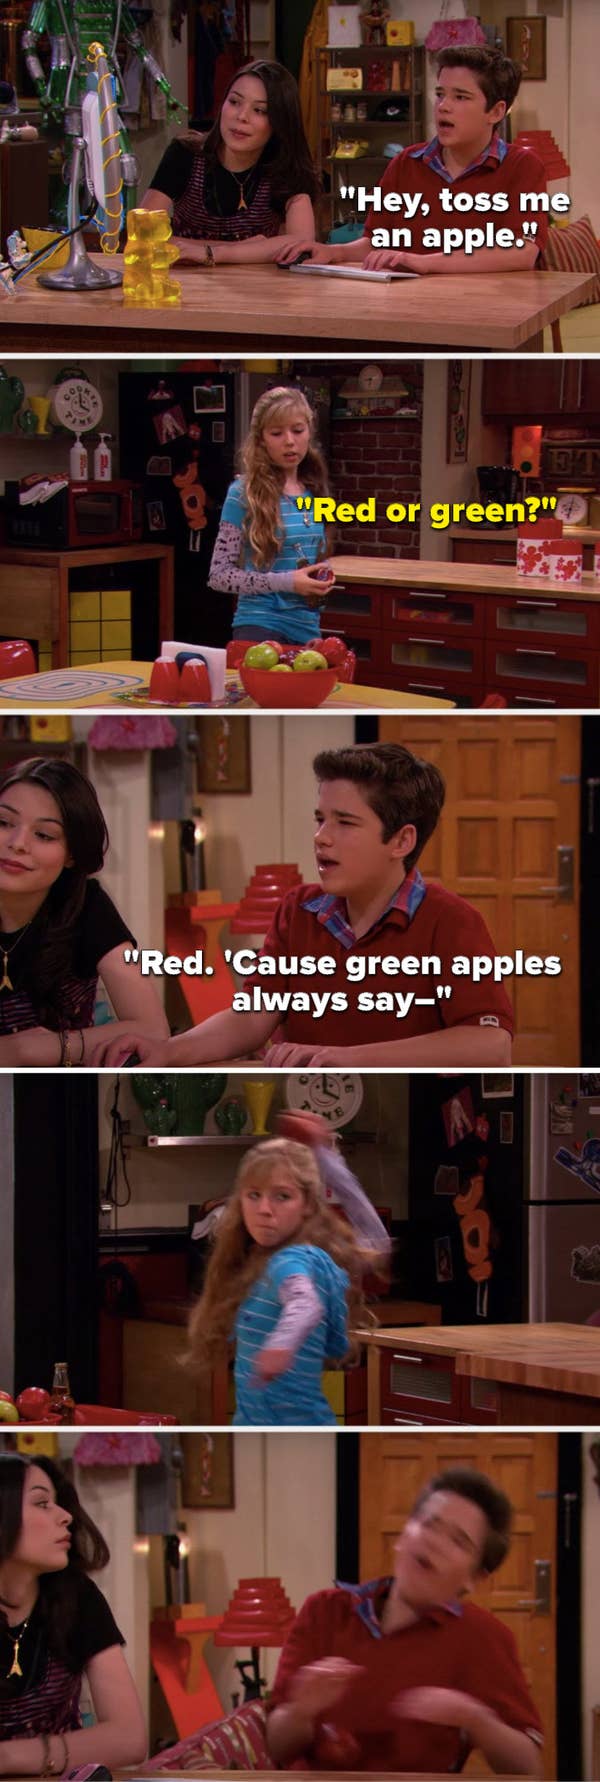 Freddie says, &quot;Hey, toss me an apple,&quot; Sam asks, &quot;Red or green,&quot; Freddie says, &quot;Red, &#x27;cause green apples always say–&quot; and Sam throws a red apple at him and hits him in the face